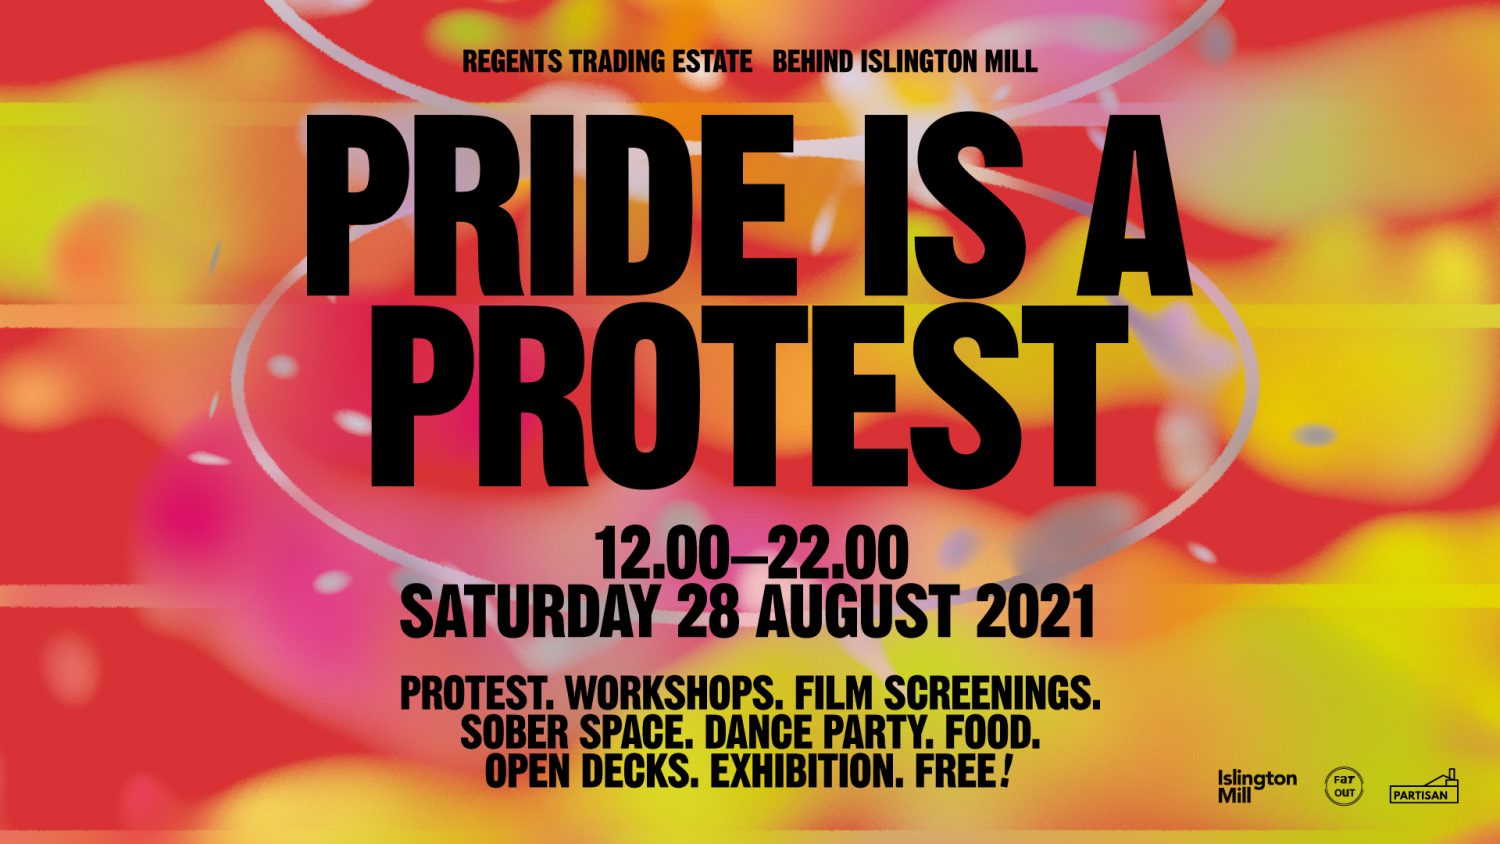 PRIDE IS A PROTEST